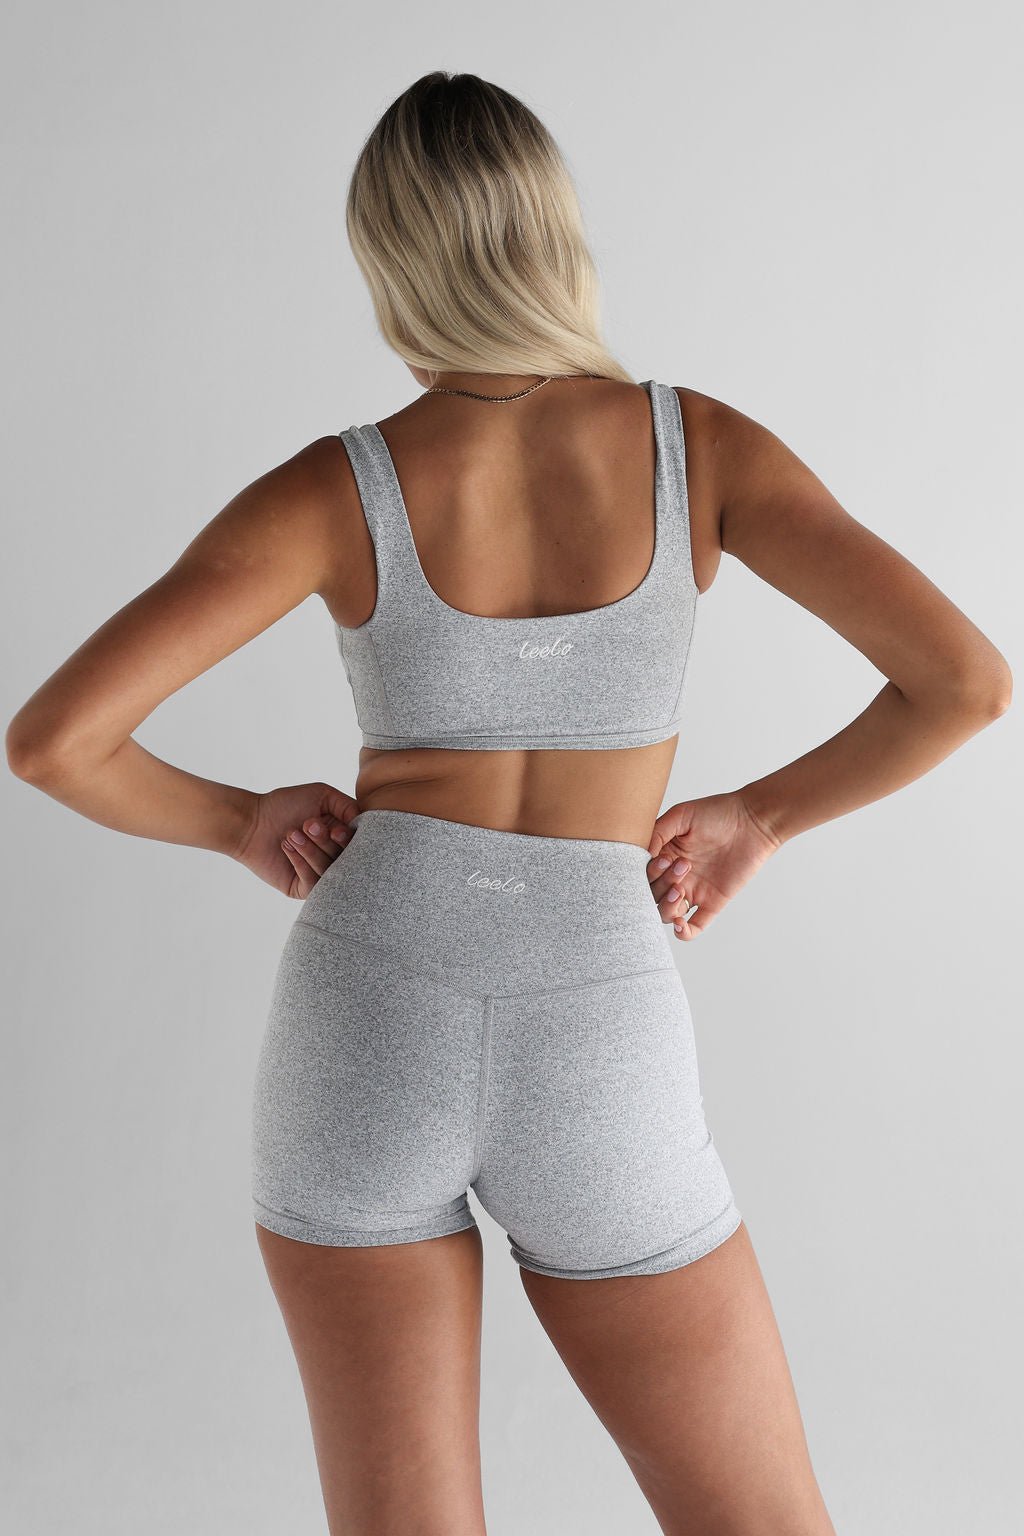 5 Bike Shorts - Marl Grey, High Waisted, Squat Proof, 5 Star Rated